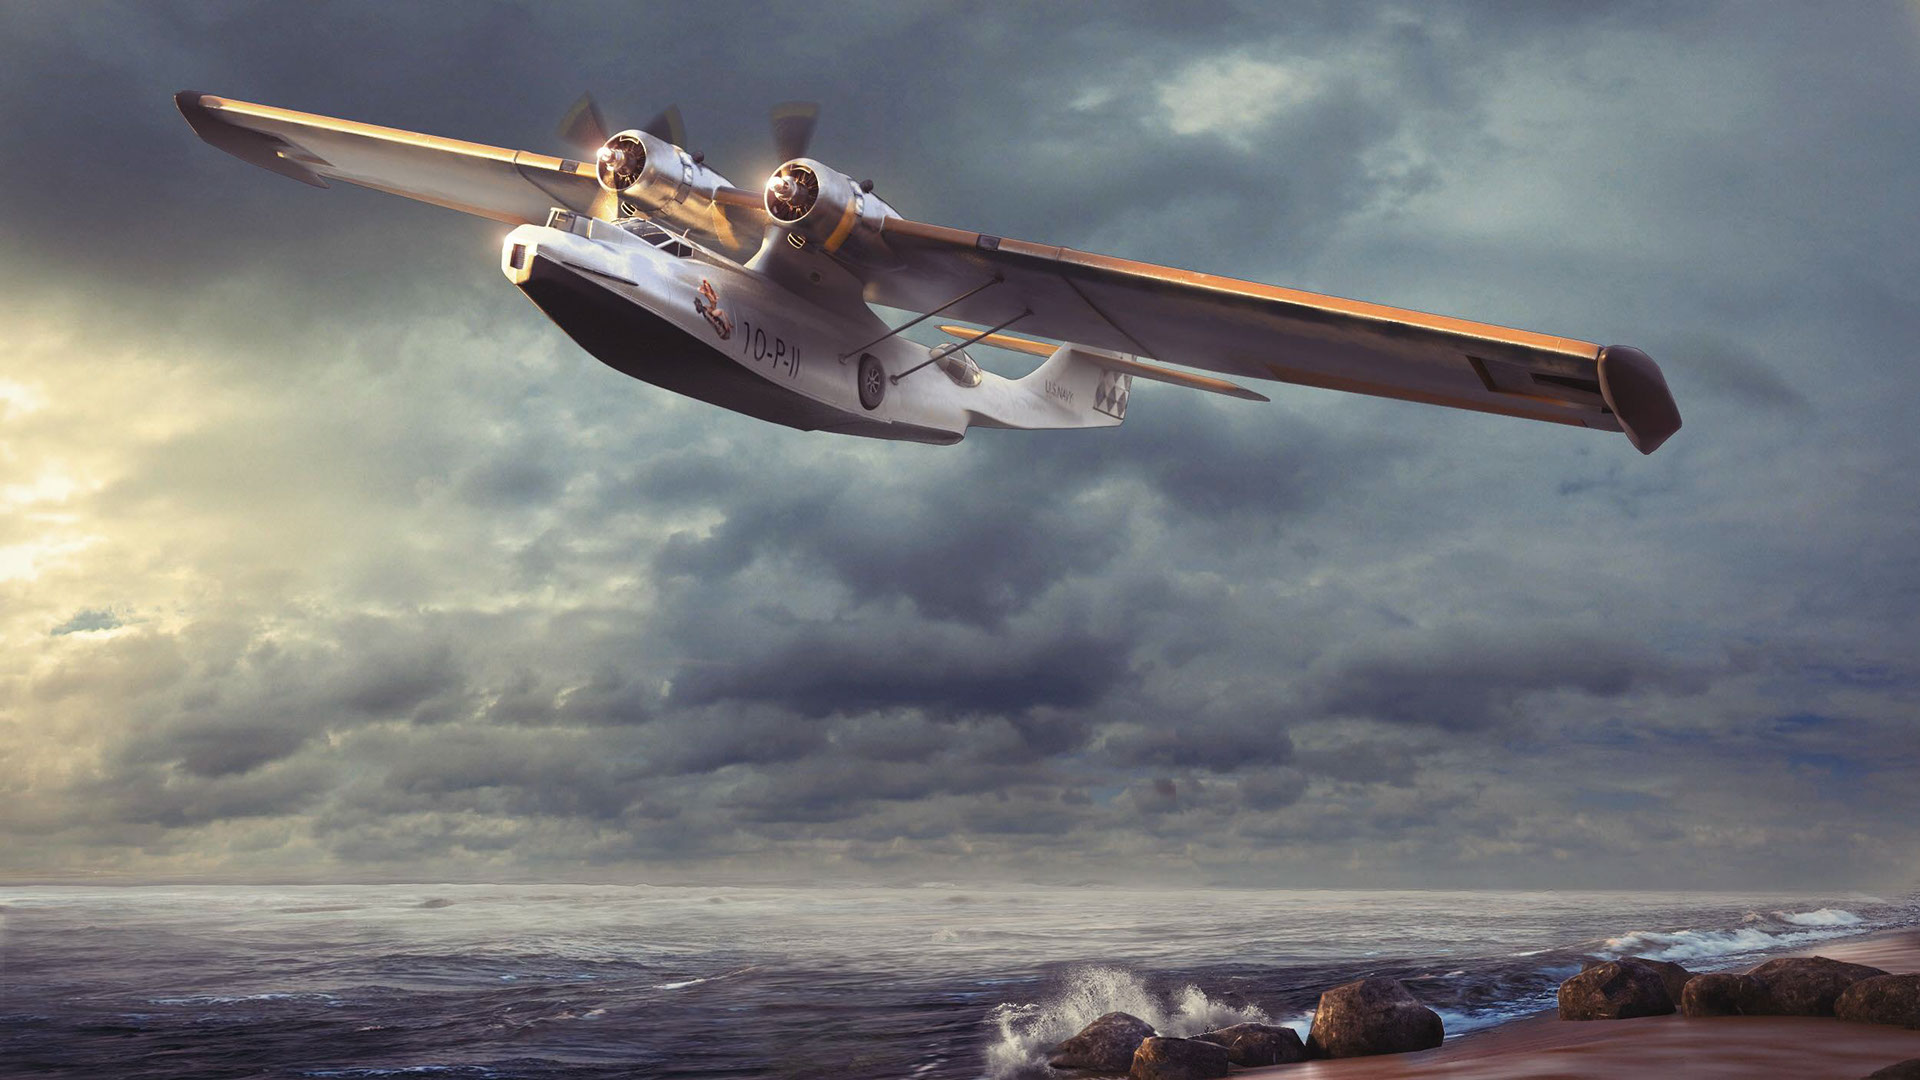 Modelling And Rendering Of Pby Catalina On